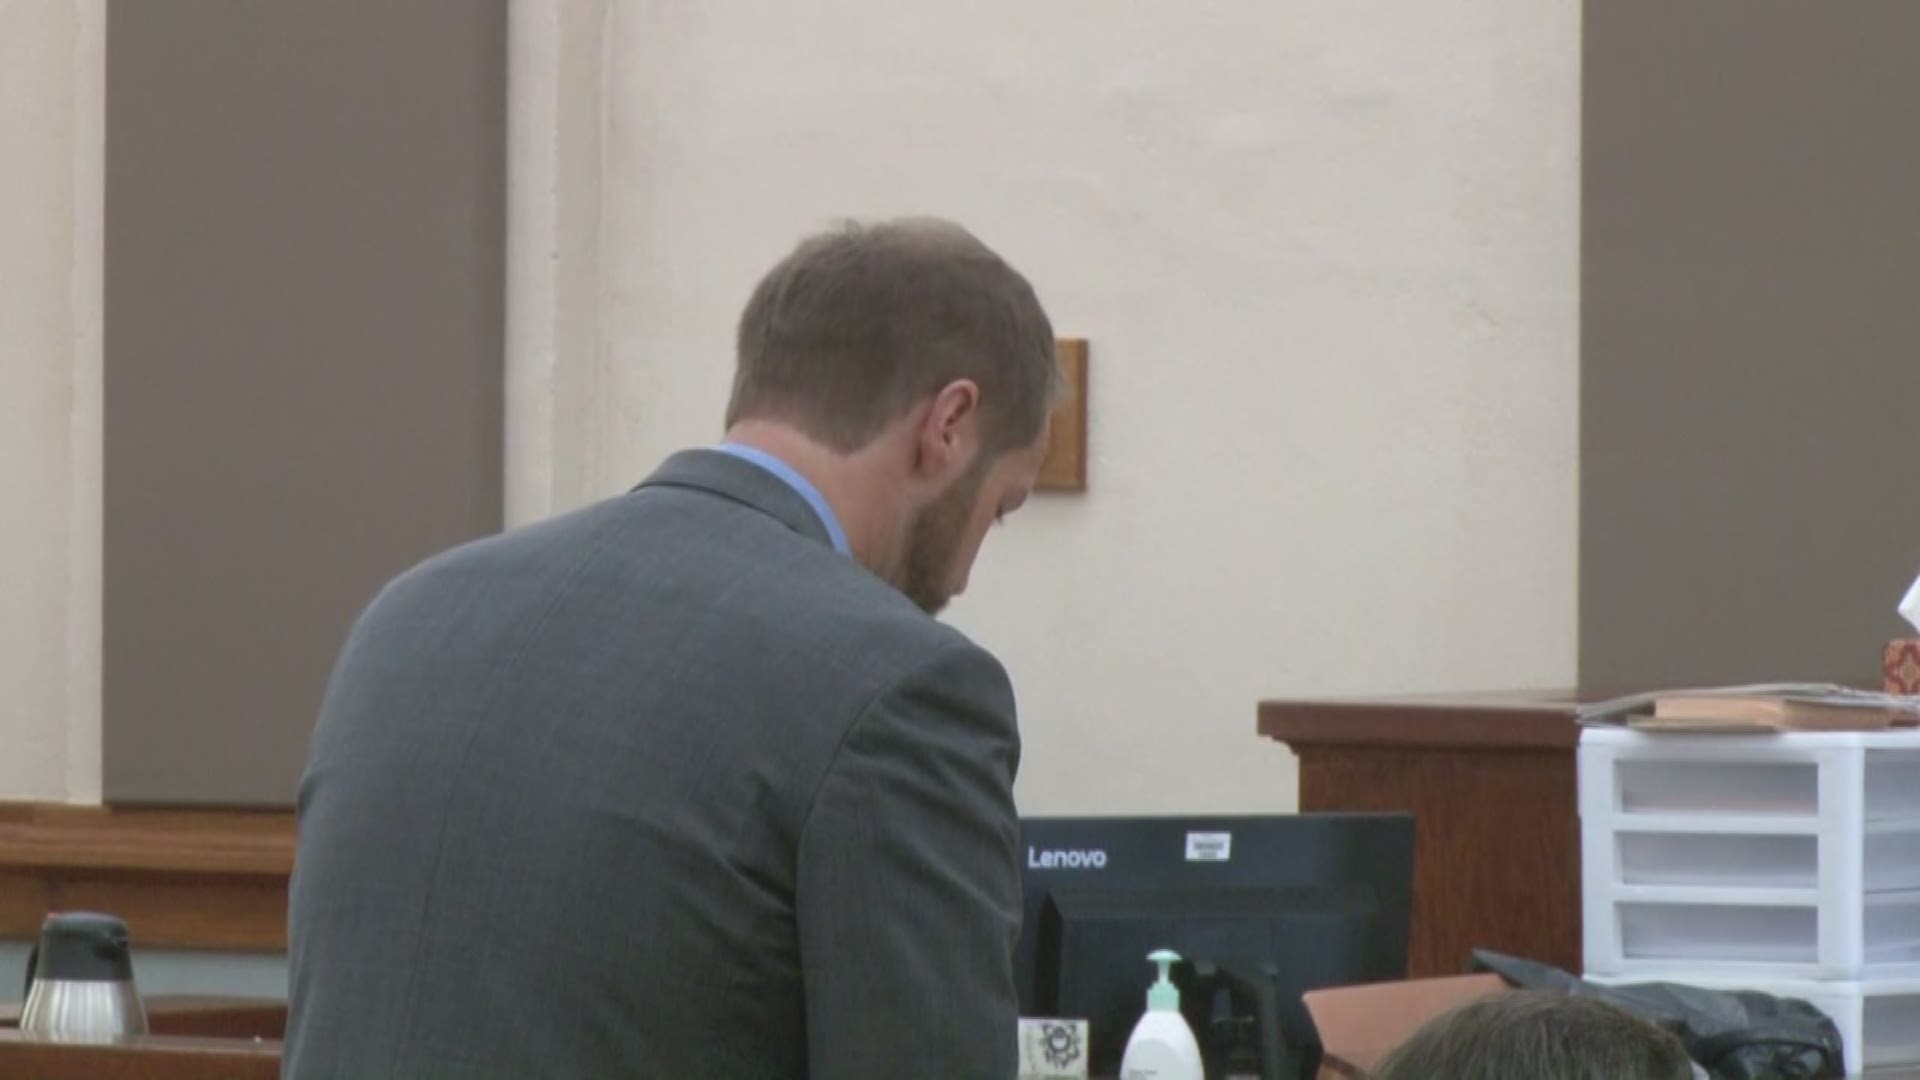 Ryan Duke is the man accused of killing and hiding Tara Grinstead's body after her death. At a Sept. 13 motions hearing, District Attorney Brad Rigby spoke about why he felt the state should not provide funding for 'ancillary' services for Duke's defense team.